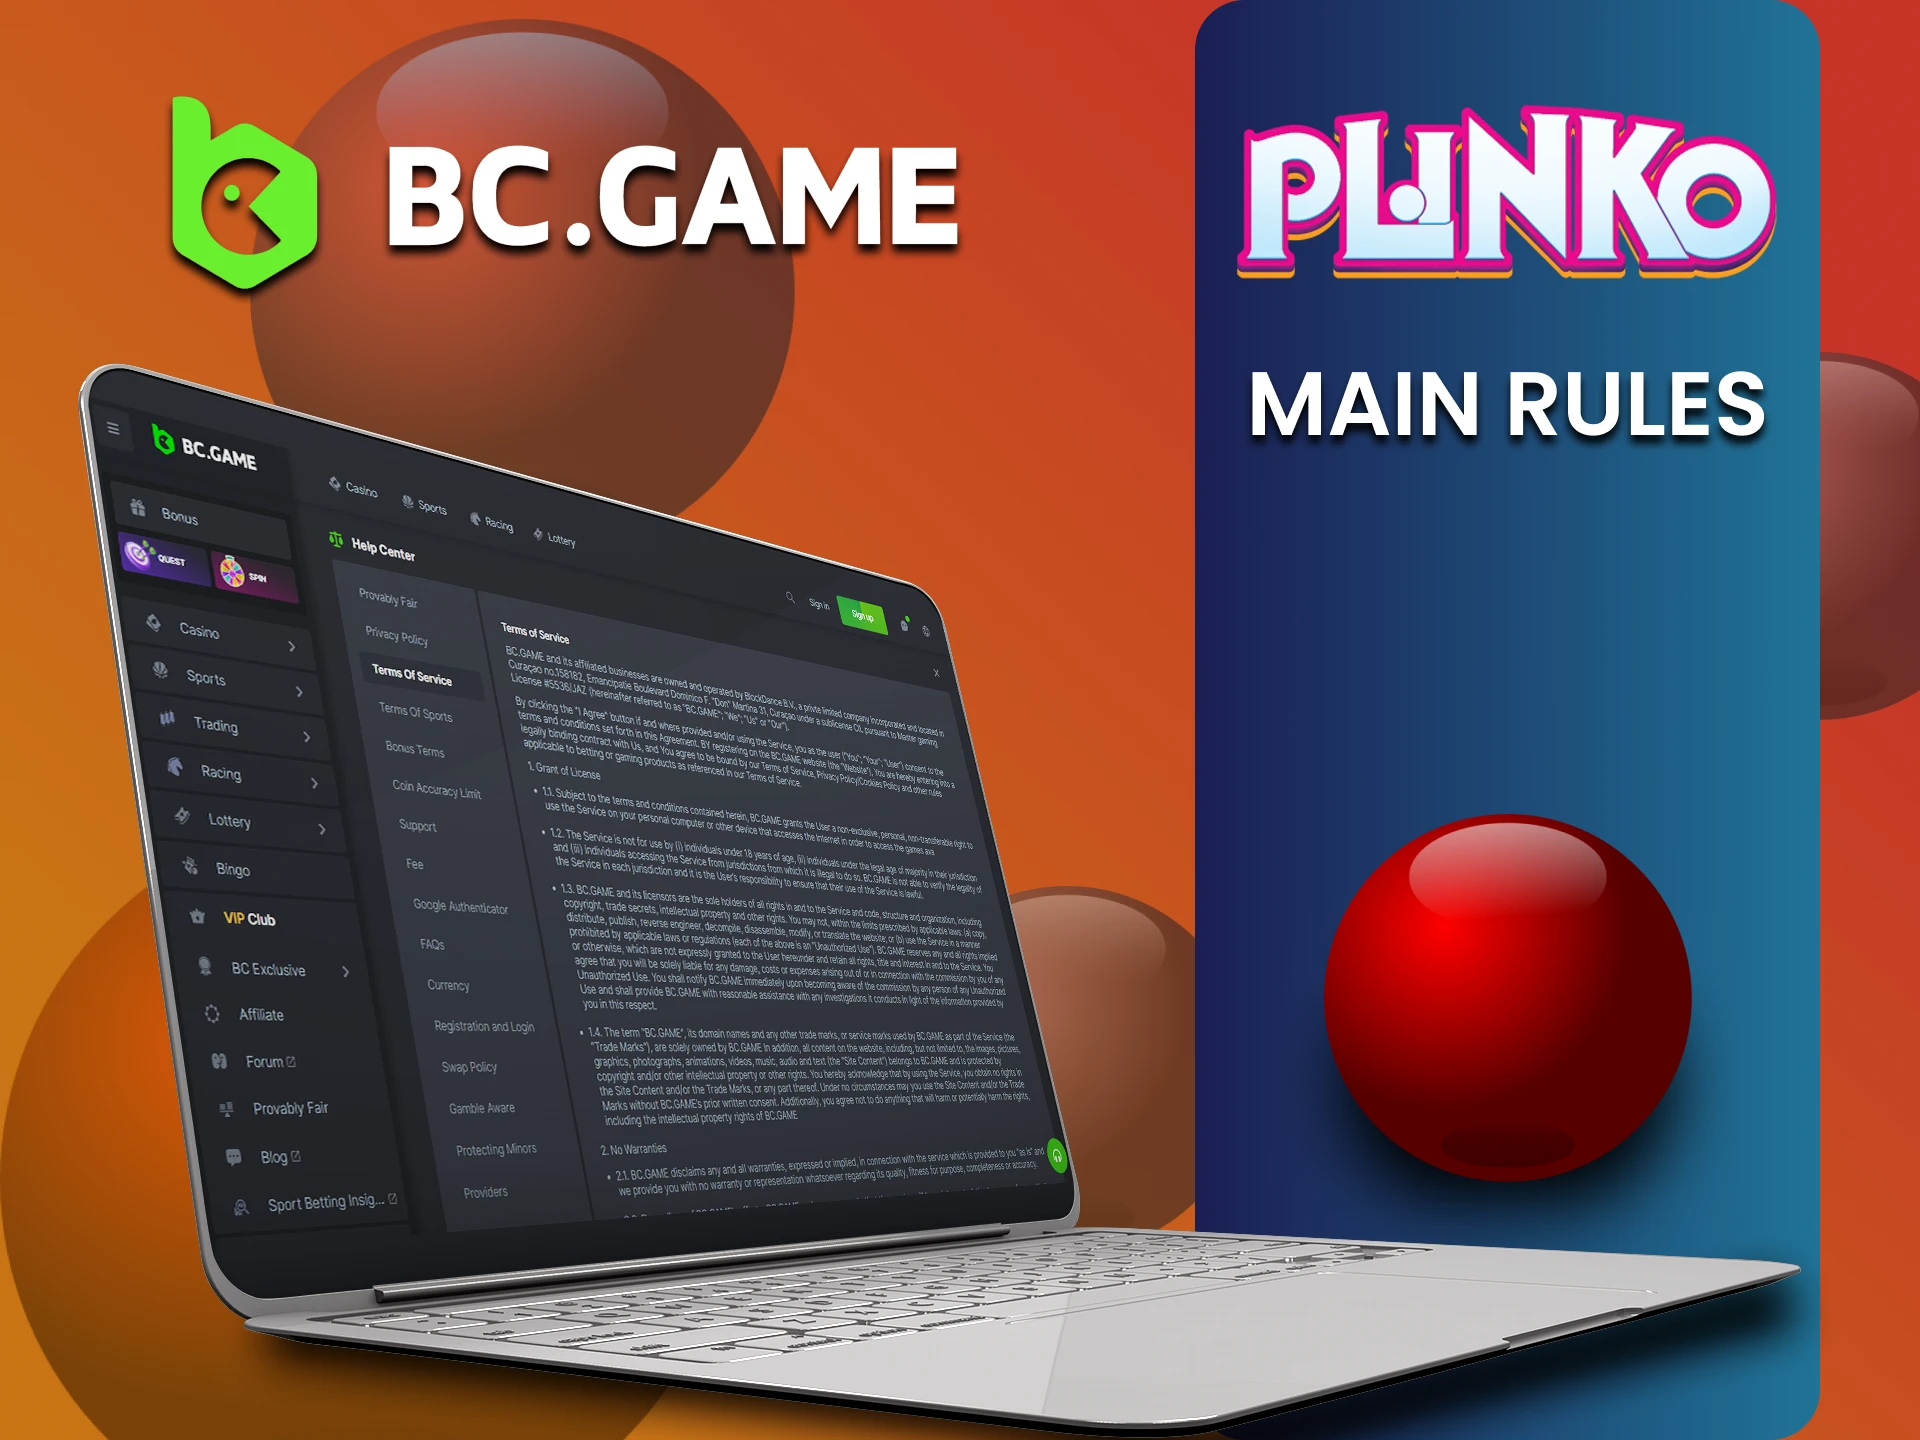 Learn the rules for using the BCGame service to play Plinko.